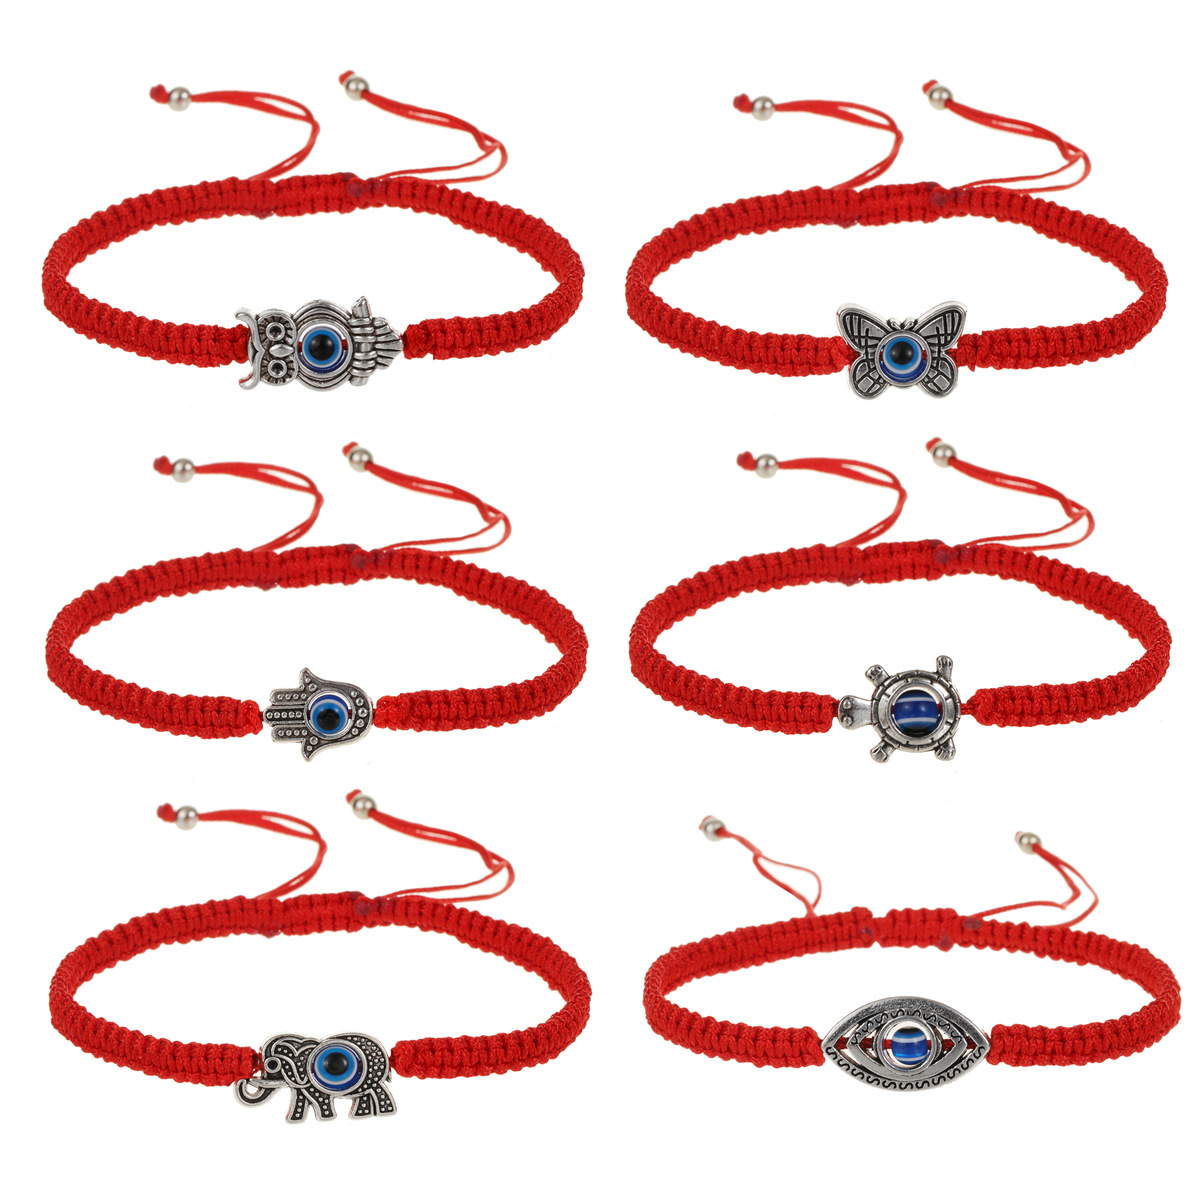 13:1 set of 6 red ropes